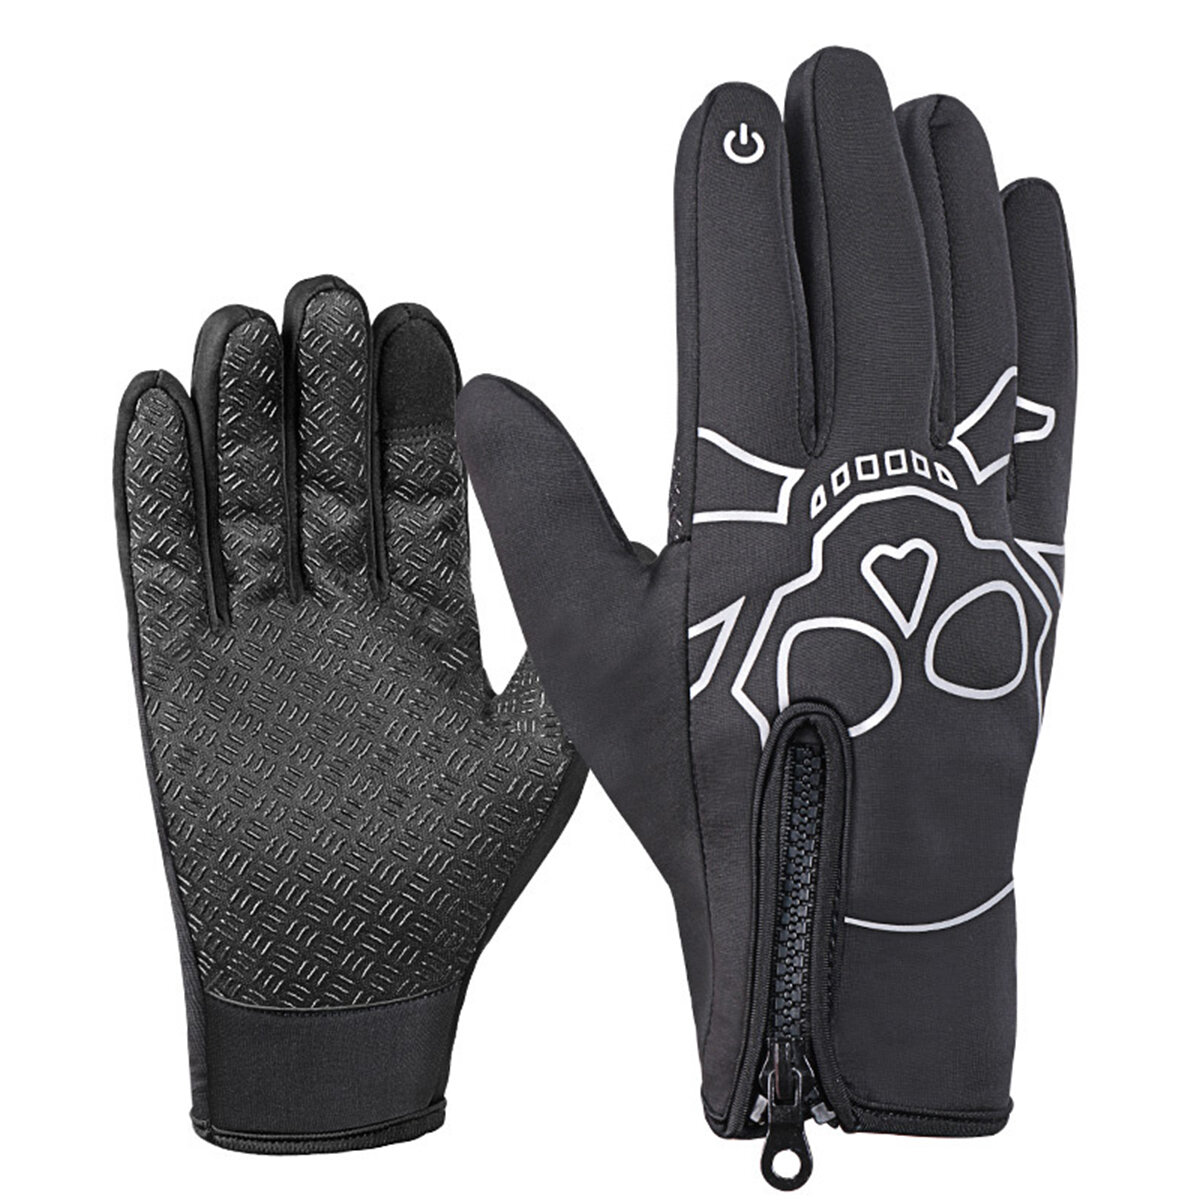 

Wrist Winter Warm Windproof Fleece Lining Gloves Touch screen Full Finger Mountaineering Skiing Cycling Glove